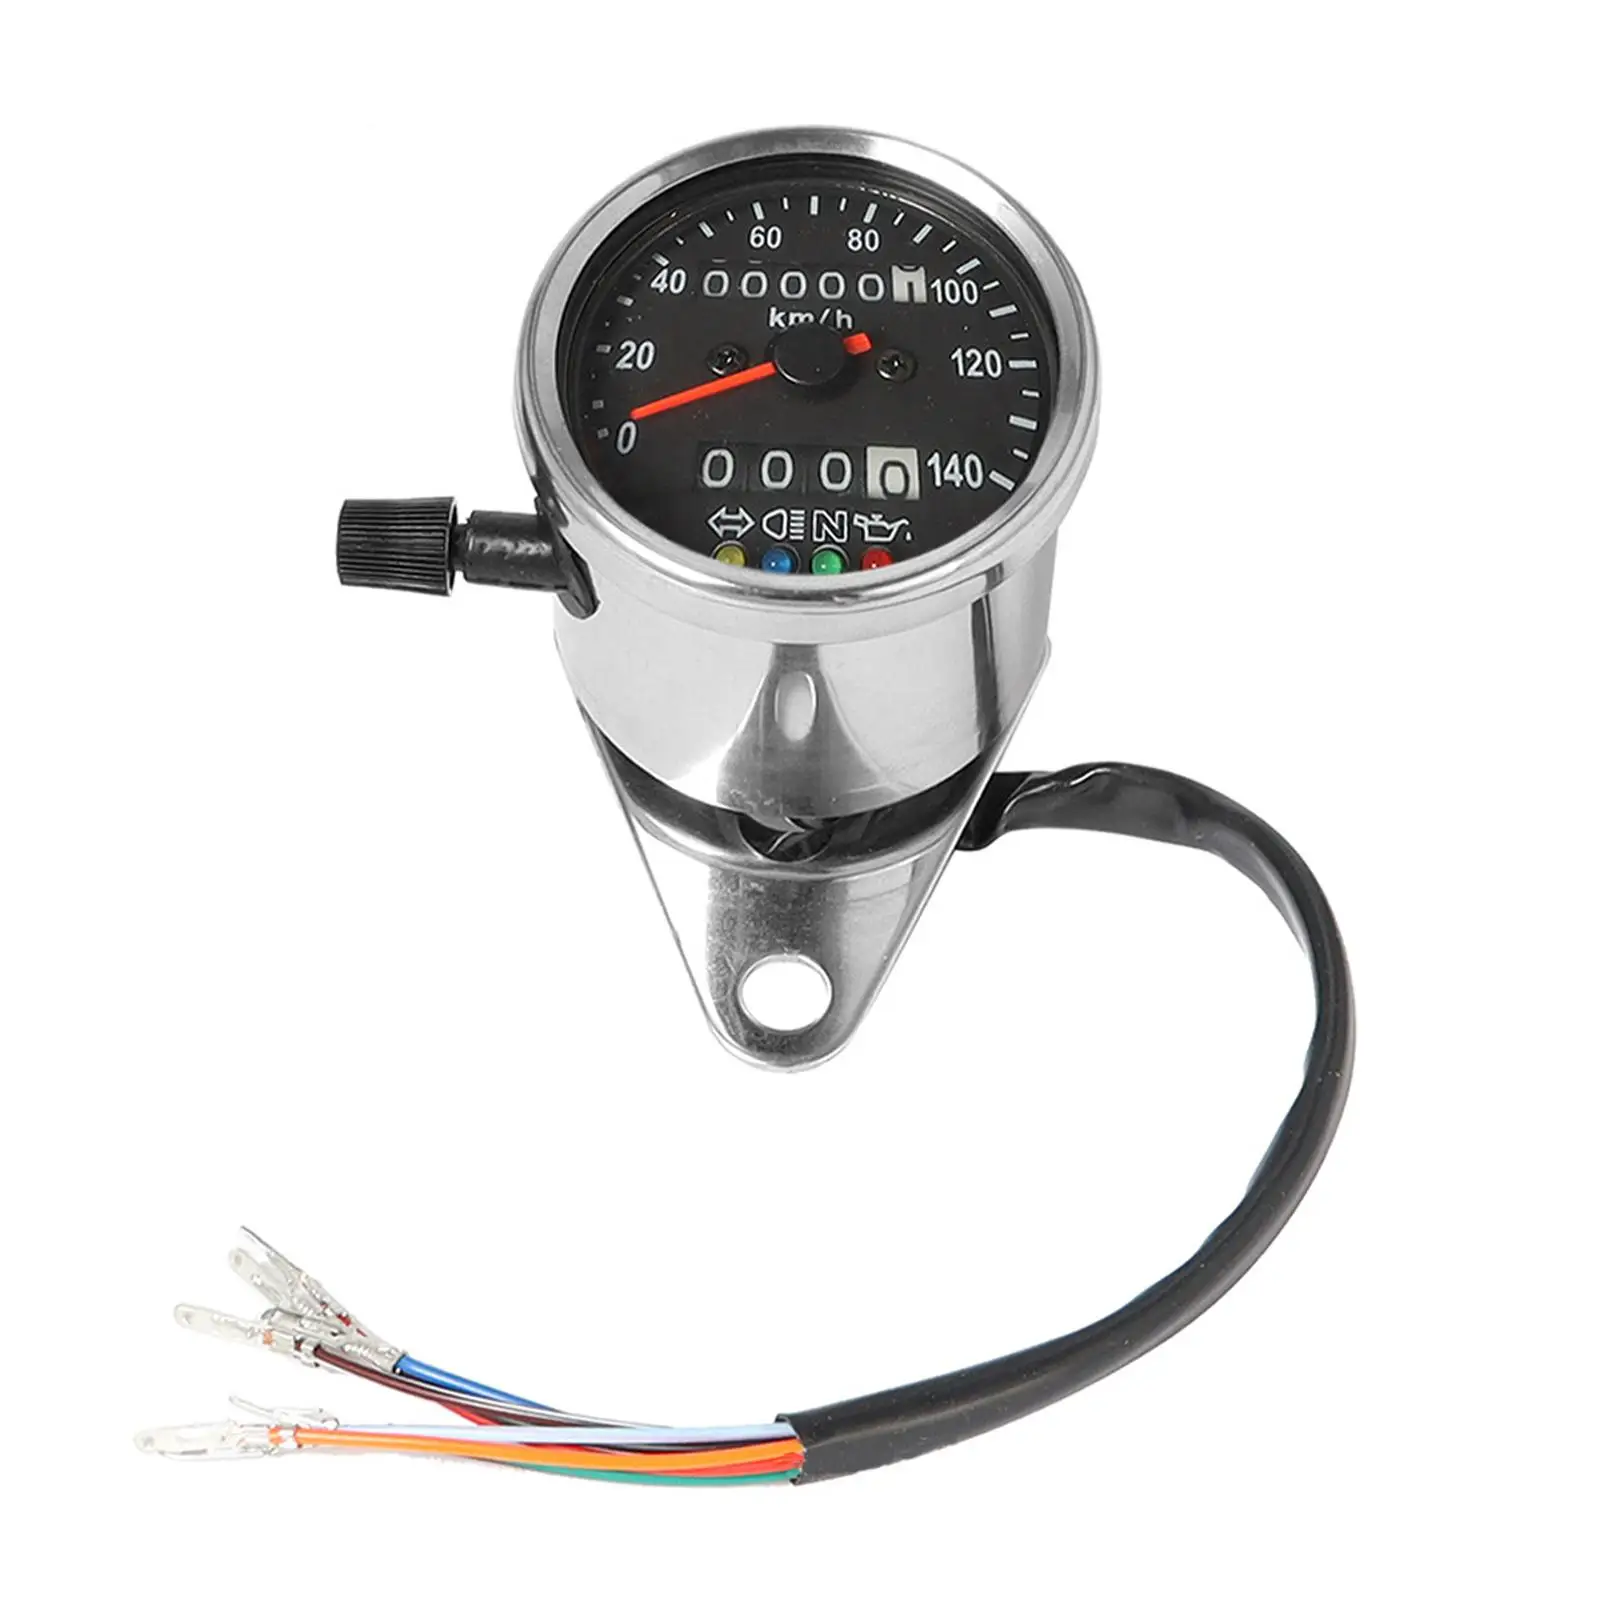 Motorbicycle Instrument with Indicator Light LED Backlight Gauge Accessories Retro Universal for Motorbike Modification